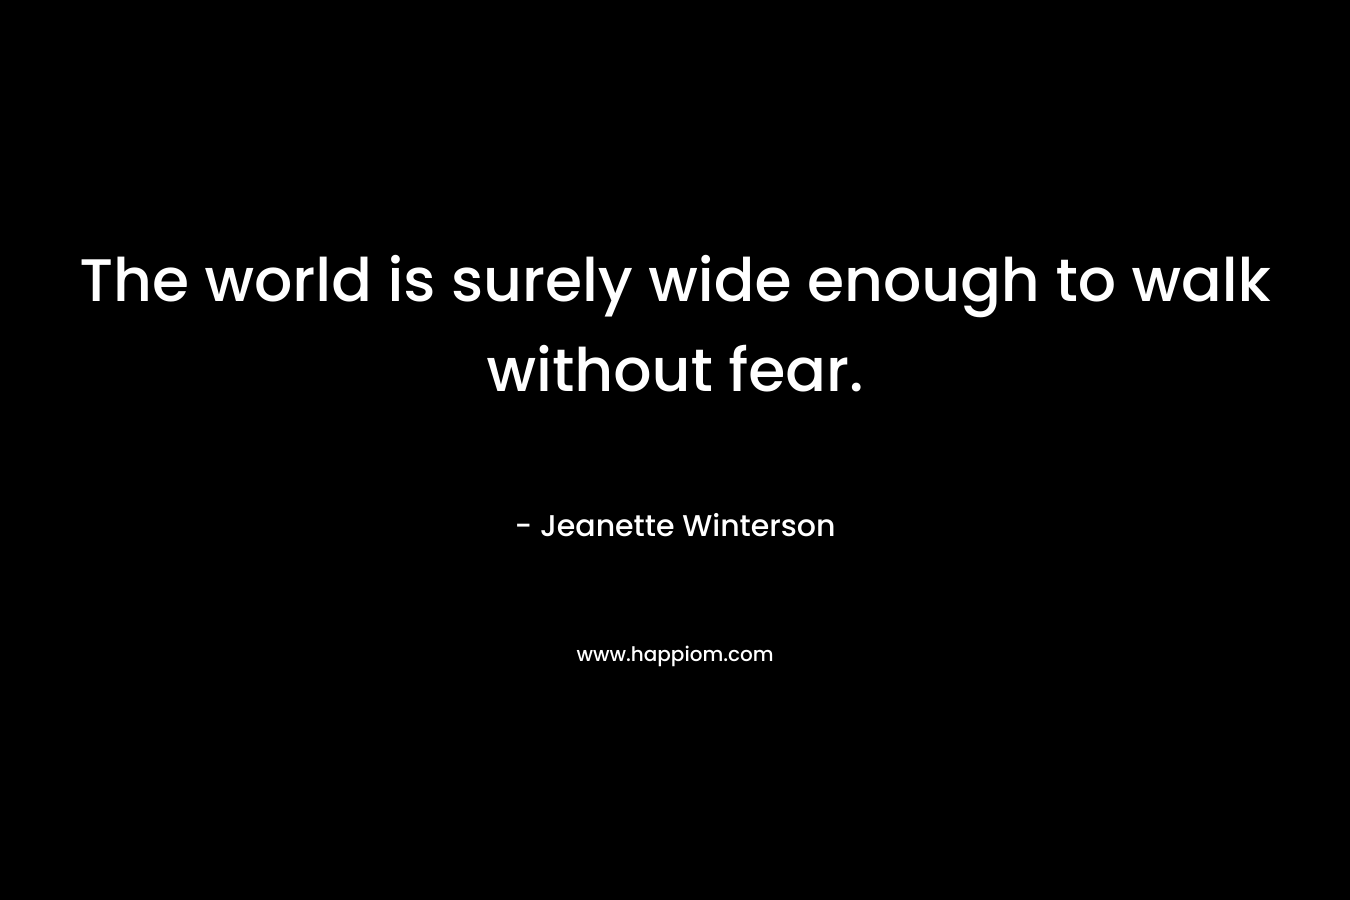 The world is surely wide enough to walk without fear.